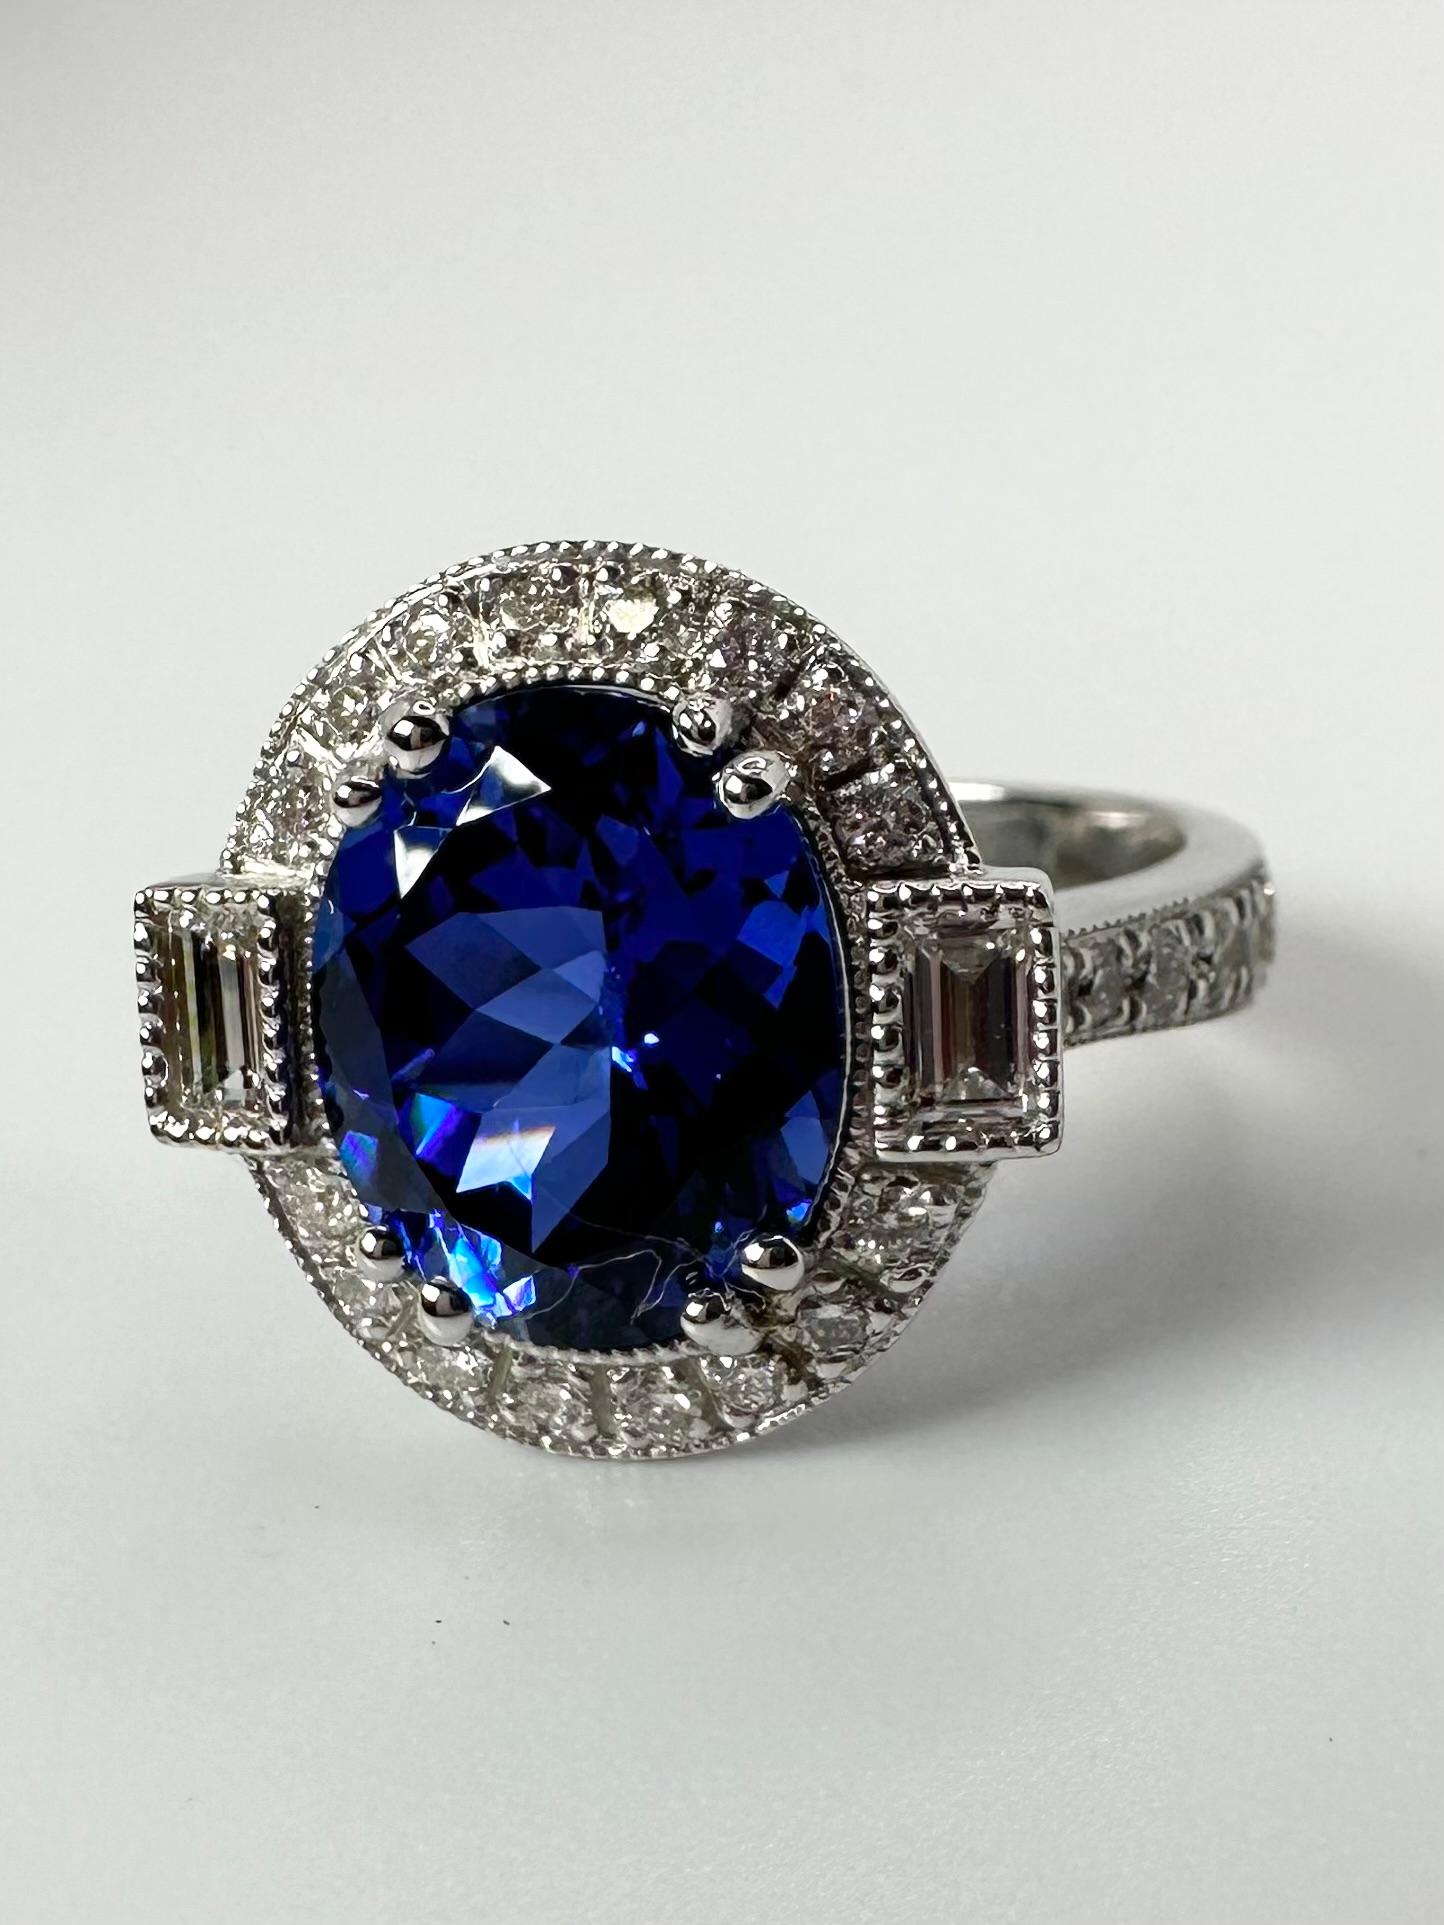 Important Tanzanite ring flanked by a diamond on either side, made with a gentle halo in platinum. Stunning rare color!

GRAM WEIGHT: 9.30gr
GOLD: 14KT white gold
NATURAL TANZANITE(S)
Clarity/Color: Slightly Included/Deep Violet
Carat:6.30ct
NATURAL